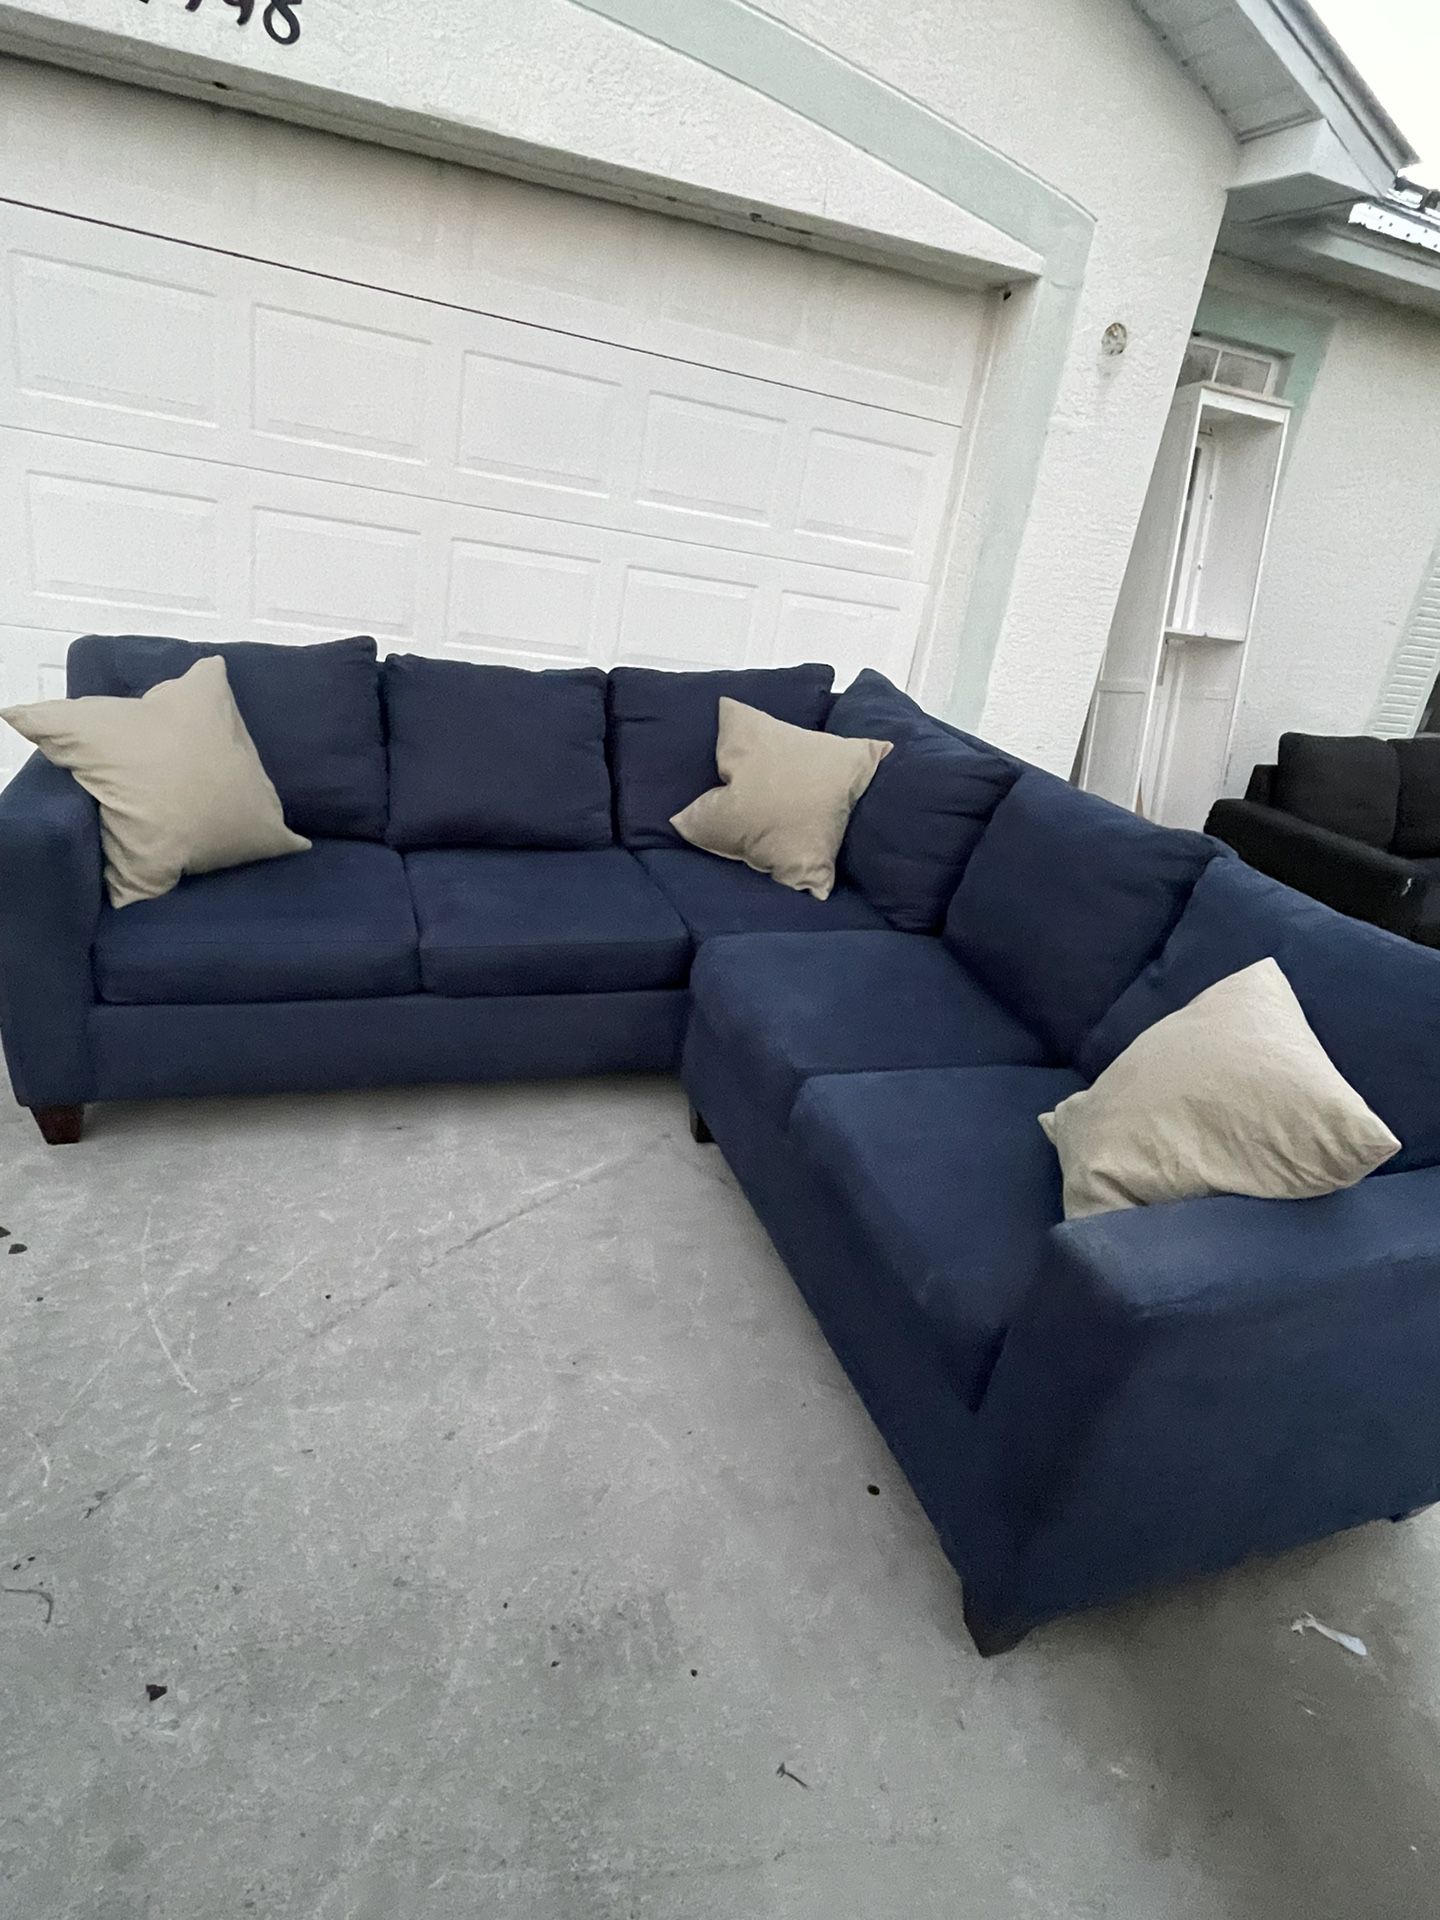 FREE DELIVERY- Blue Sectional